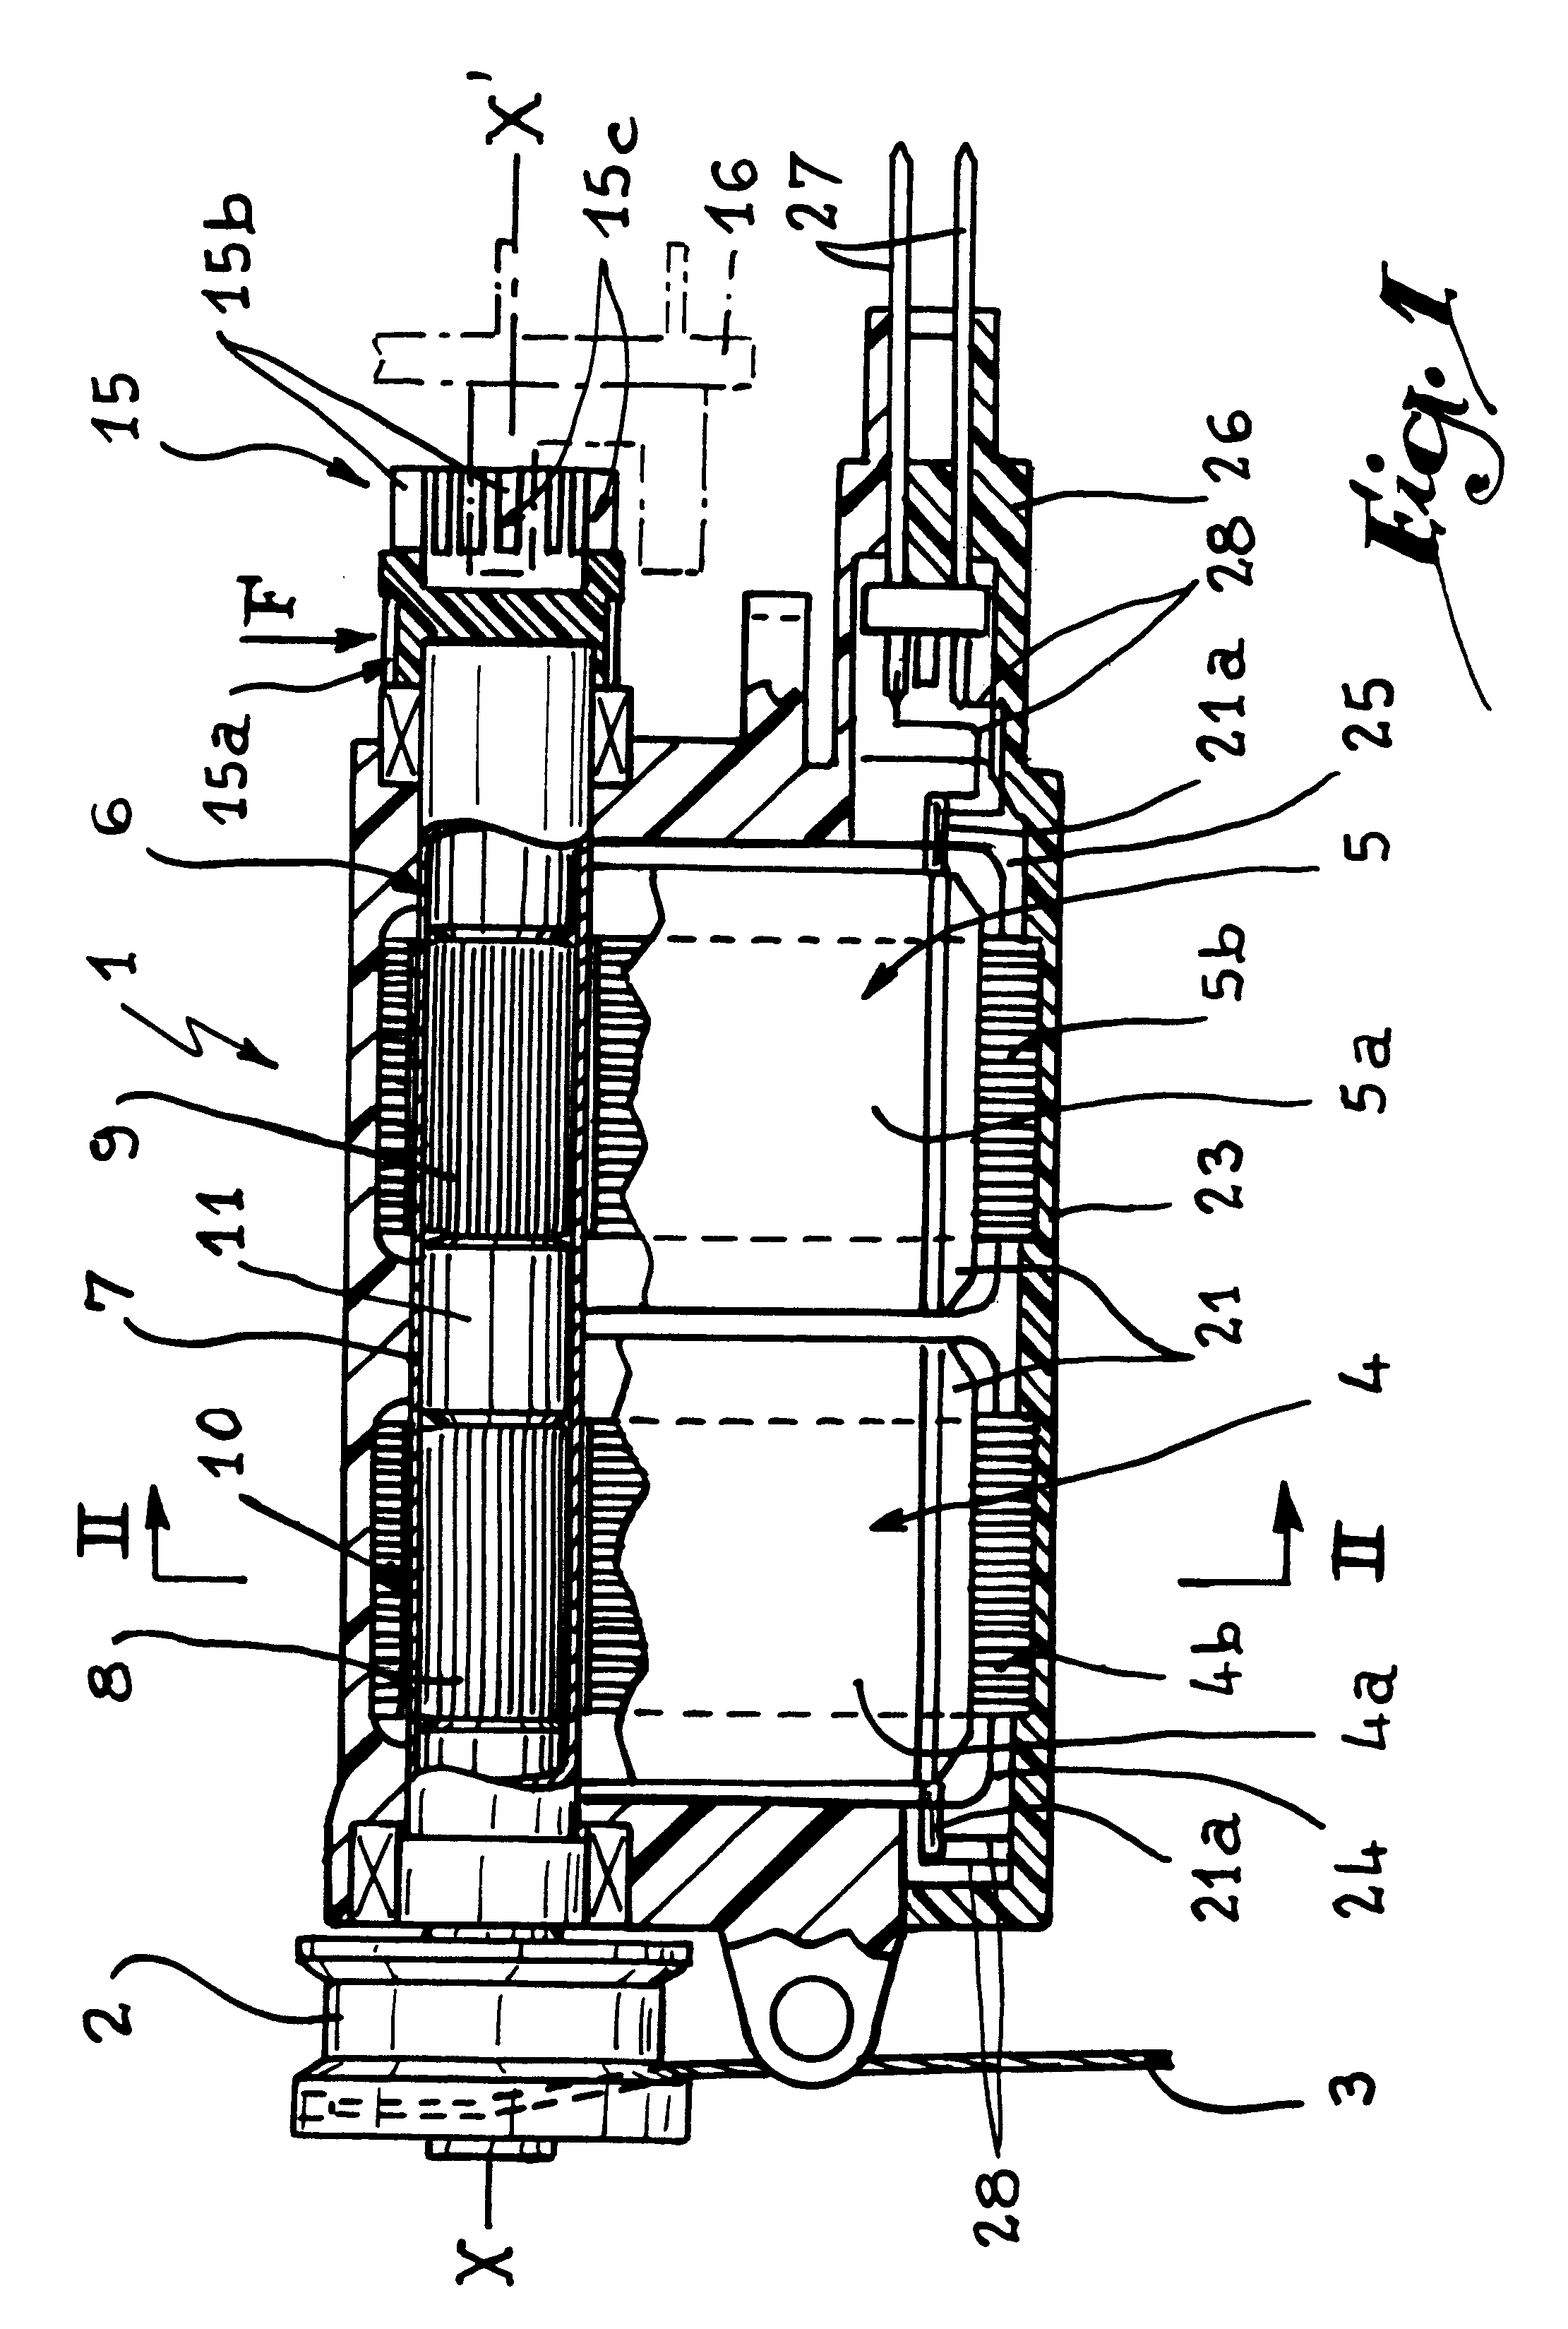 Process of manufacturing an electrical rotating actuator such as for use in weaving looms and weaving systems